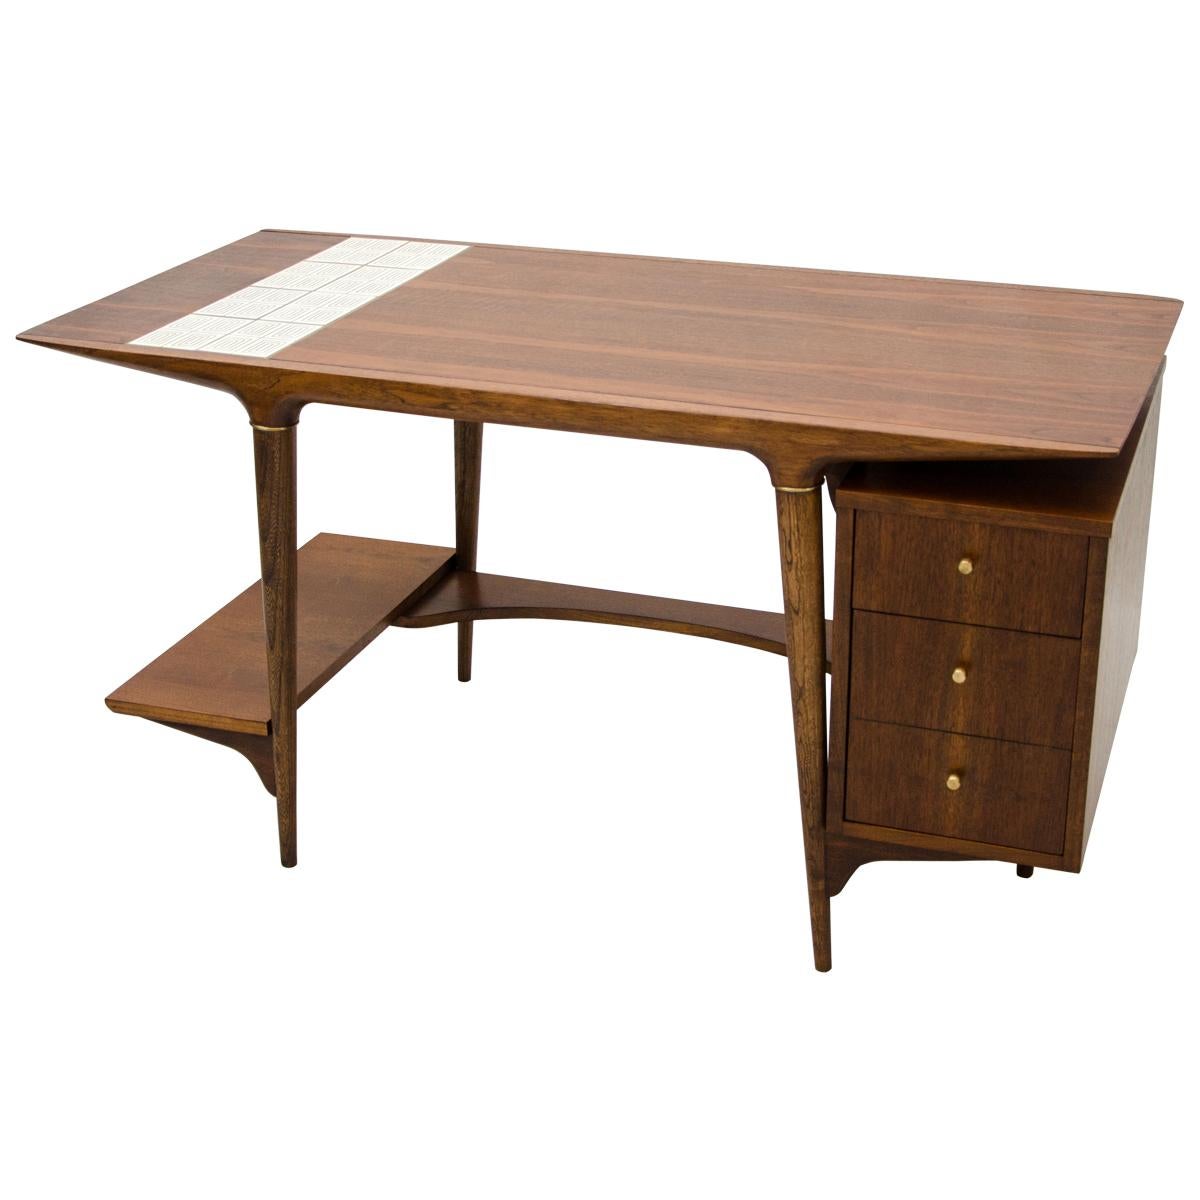 Unusual Mid Century Desk by Lane, with Floating Drawer Cabinet & Tile Insert